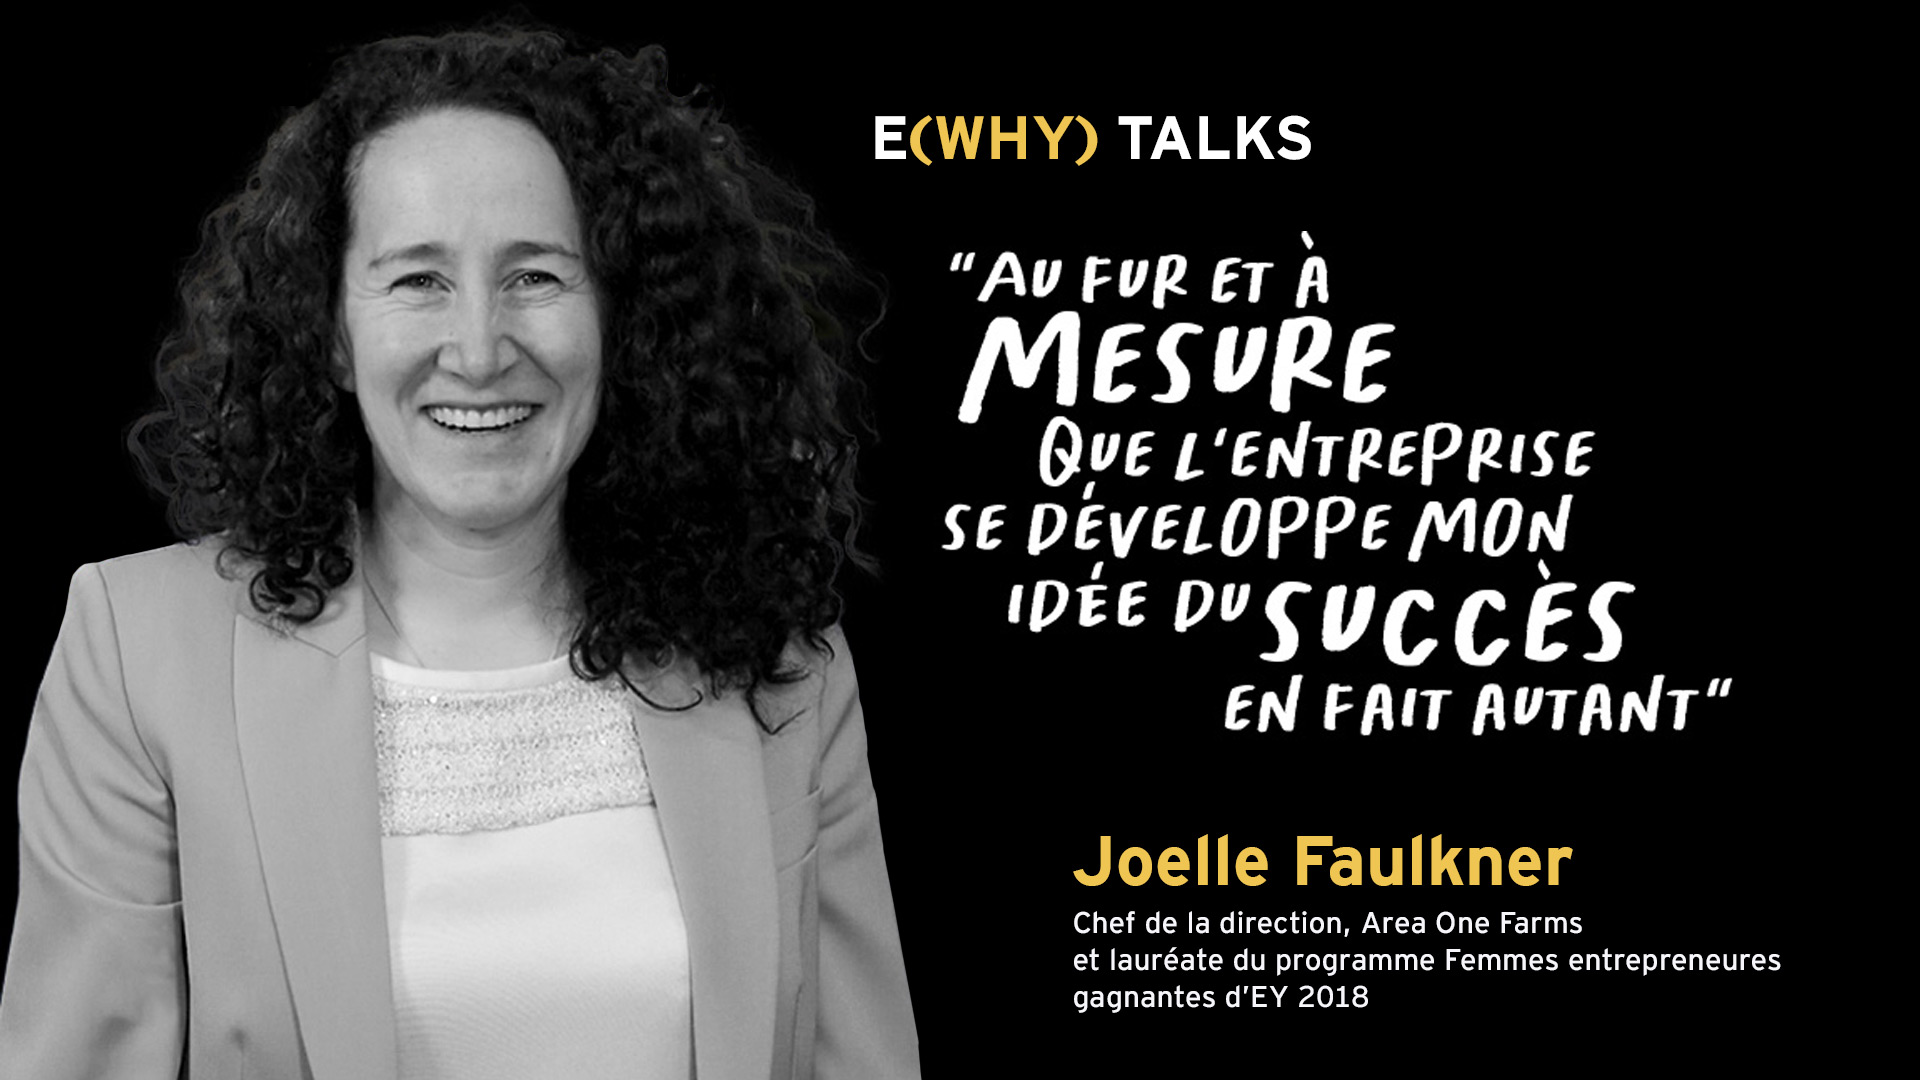 Interview with Joelle Faulkner